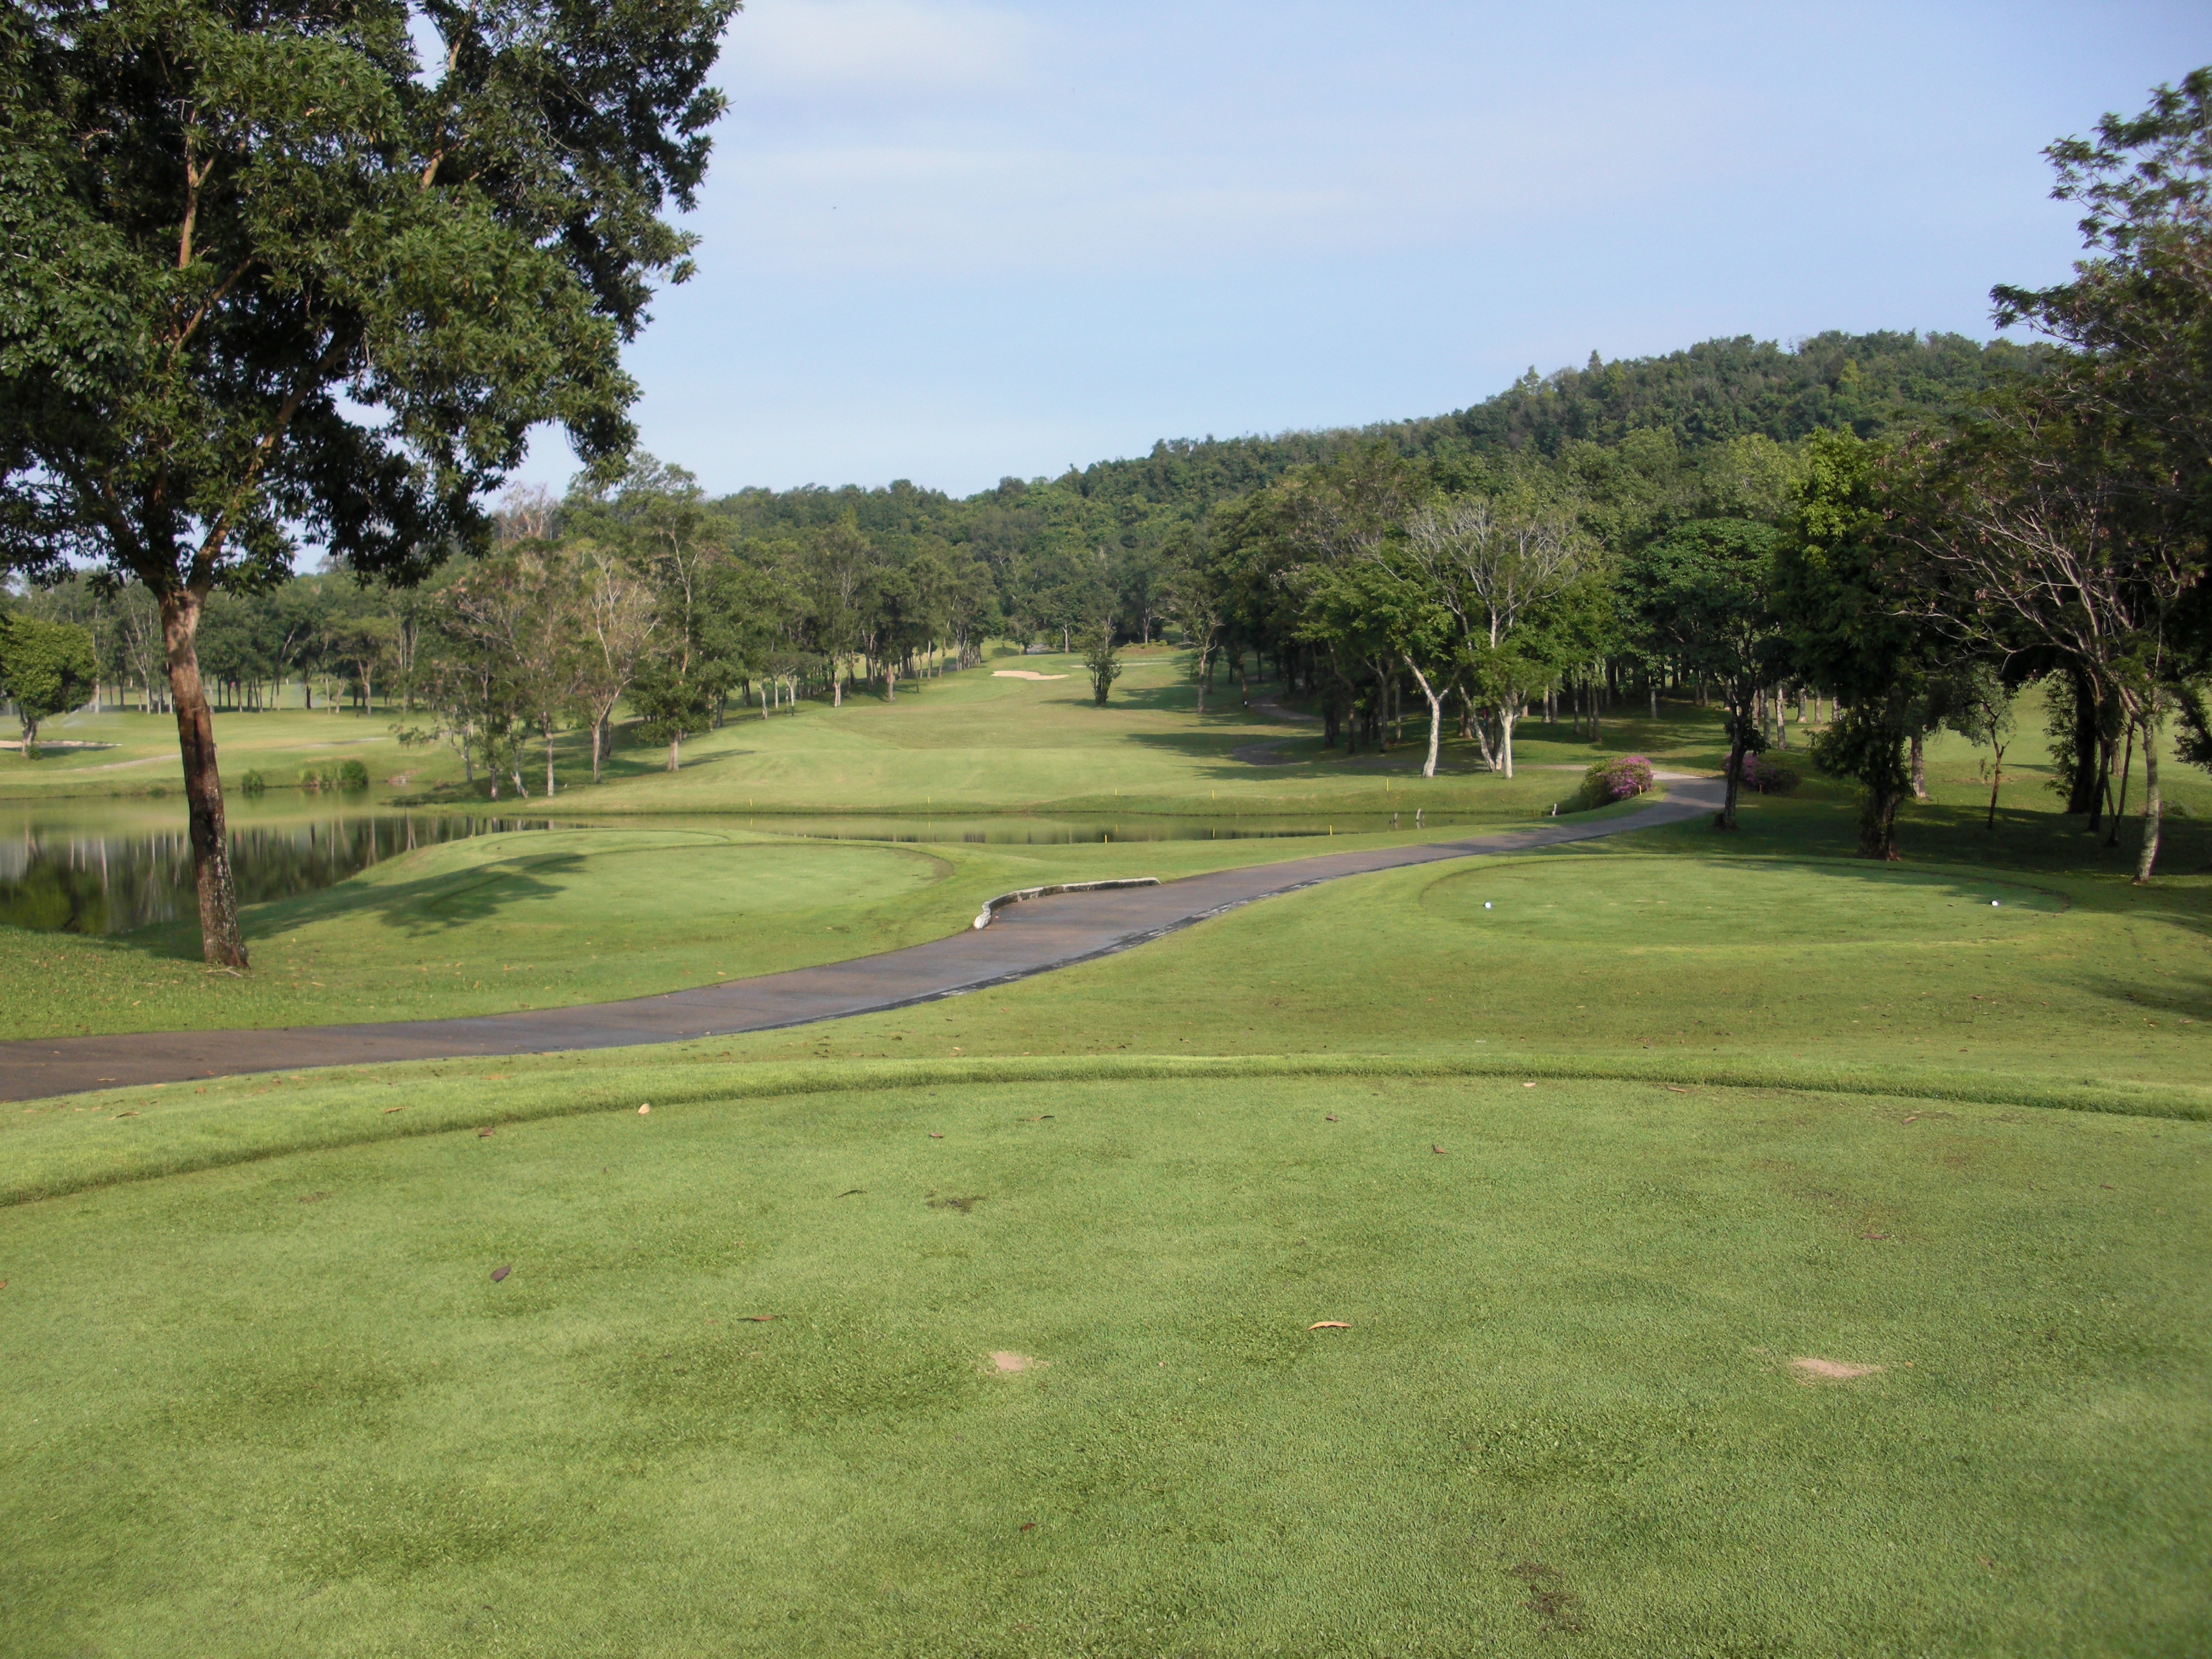 14th hole blue canyon country club lakes course, phuket